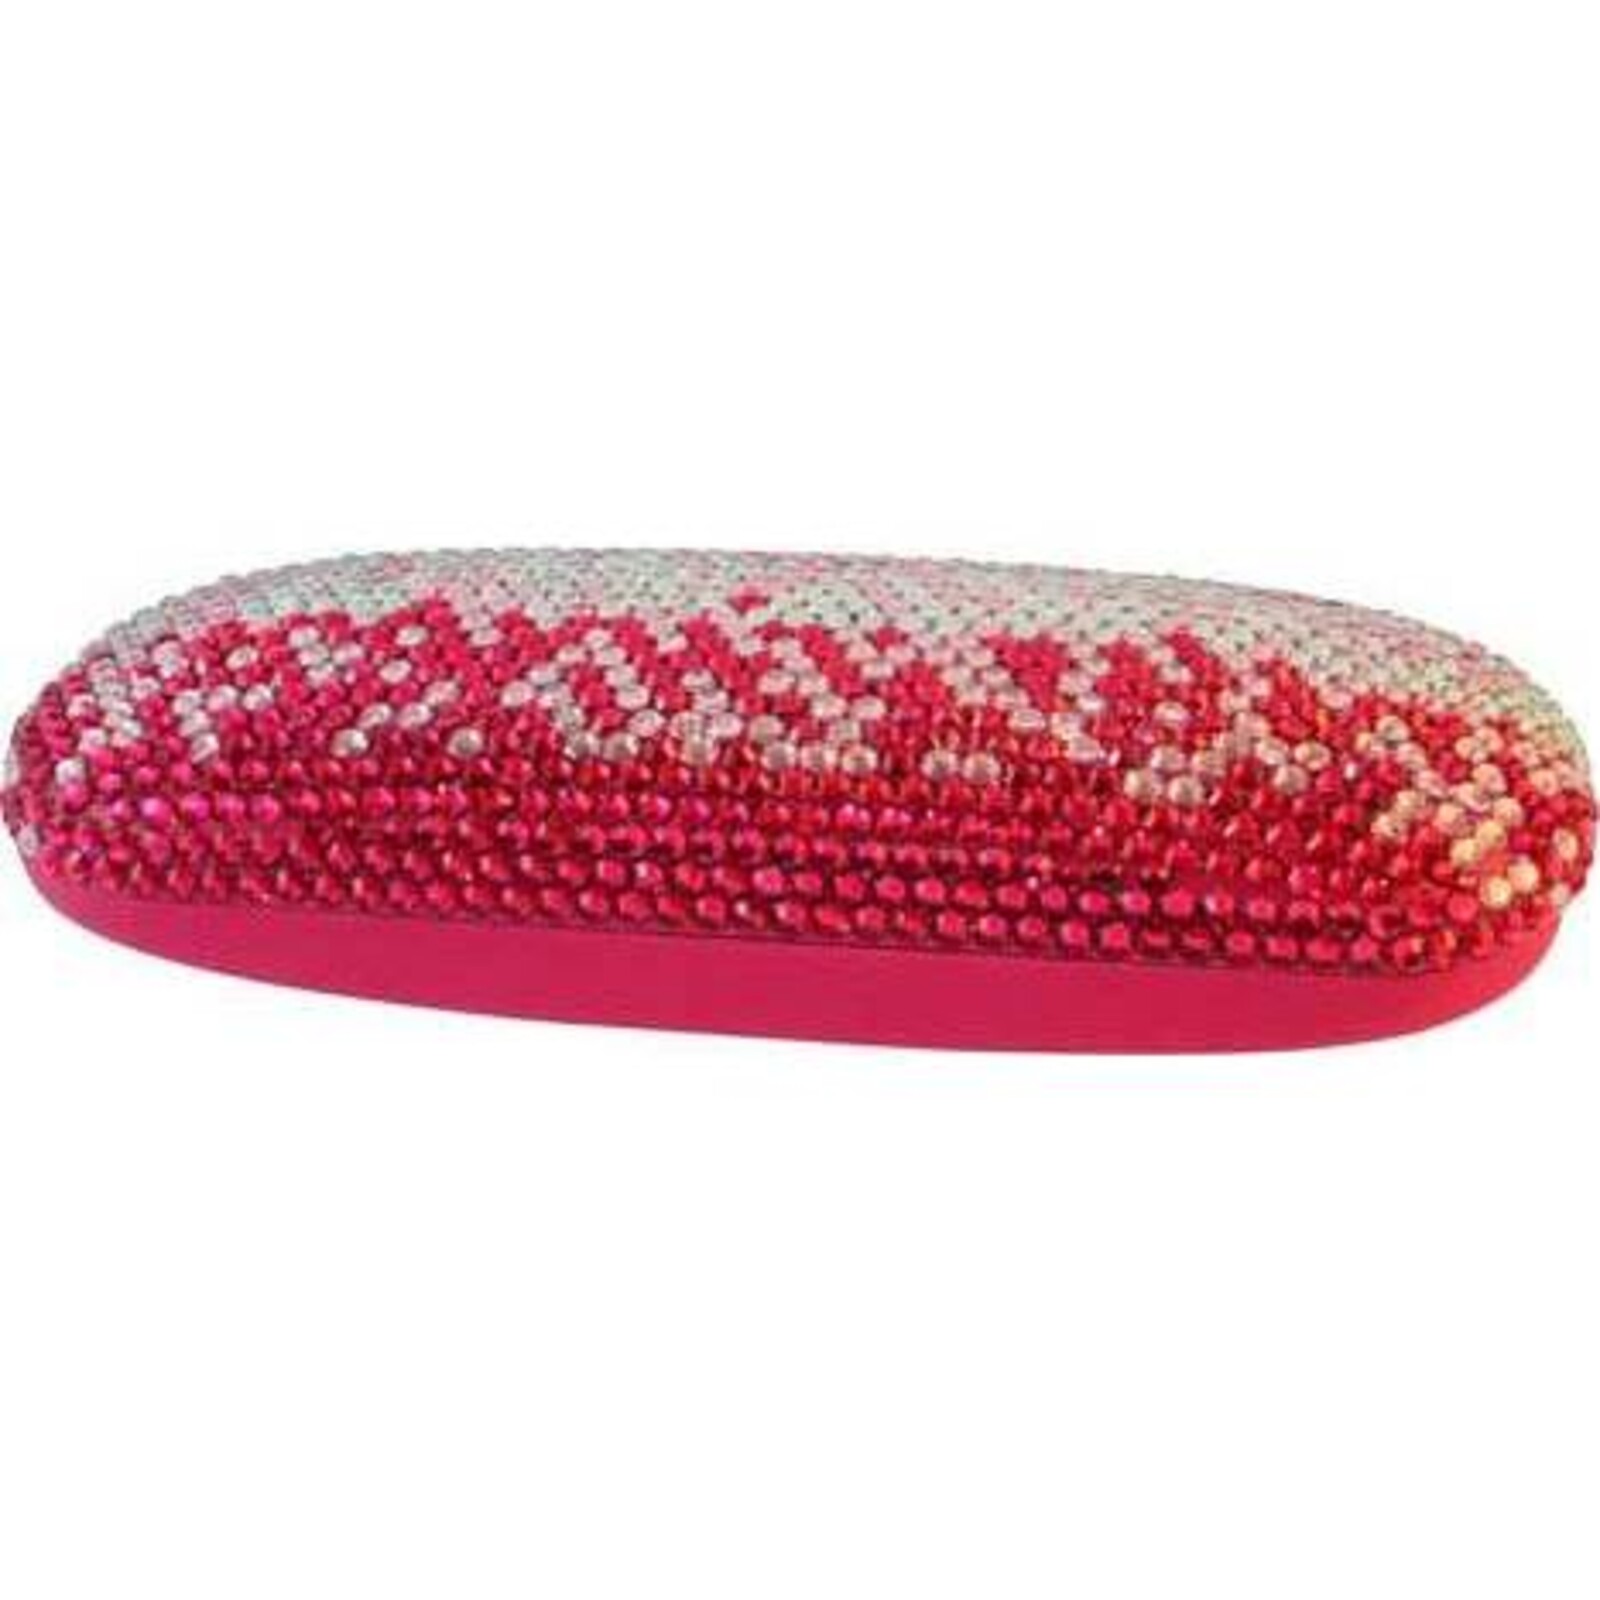 Glasses Case - Pink Shade